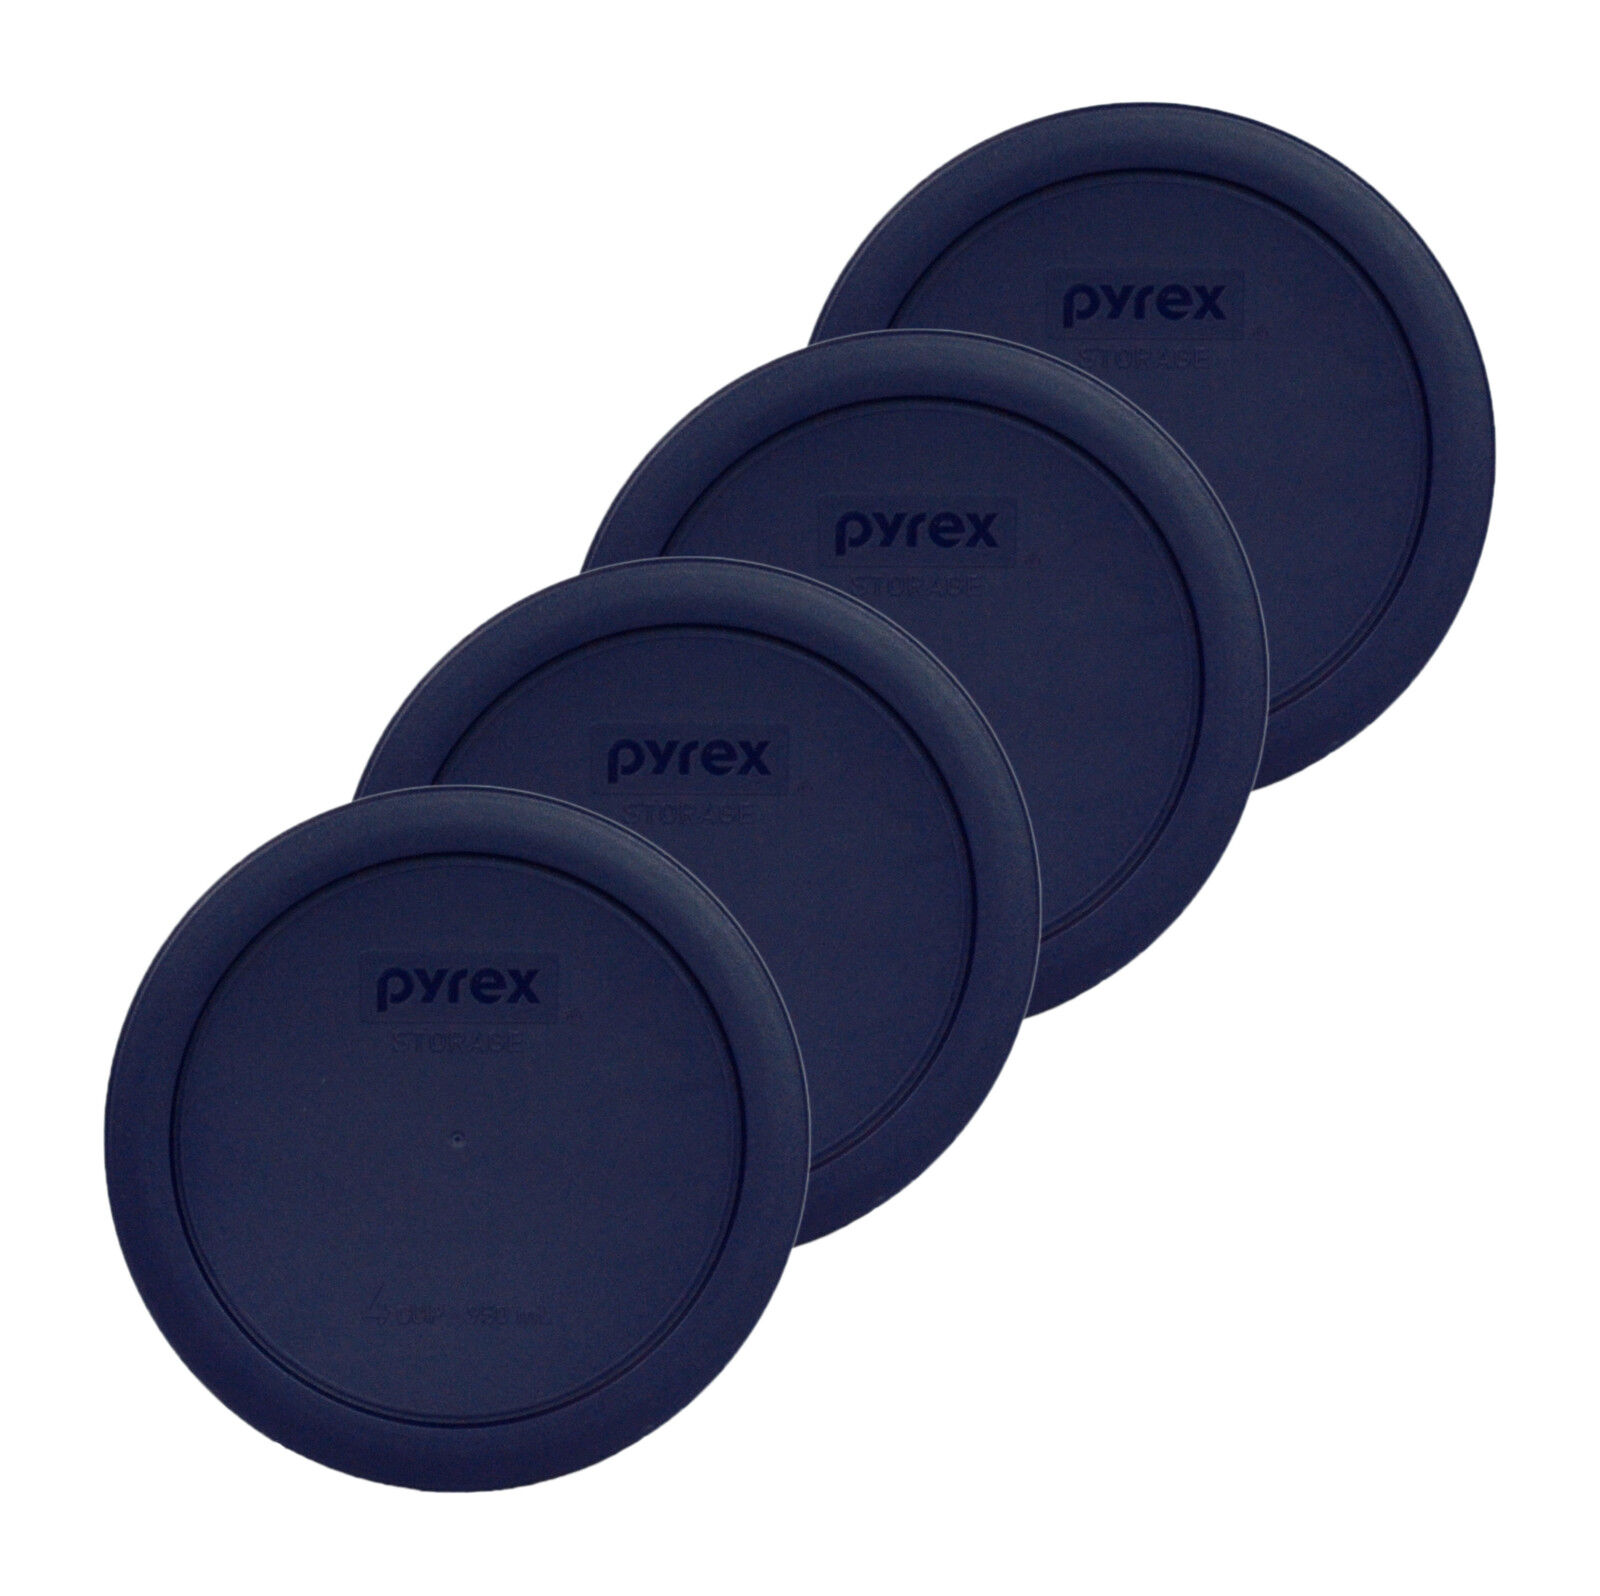 Pyrex 7201-PC Round 4 Cup Blue Food Storage Lid Cover for 7201 Dish (4 Pack) Pyrex 7201PC - фотография #3